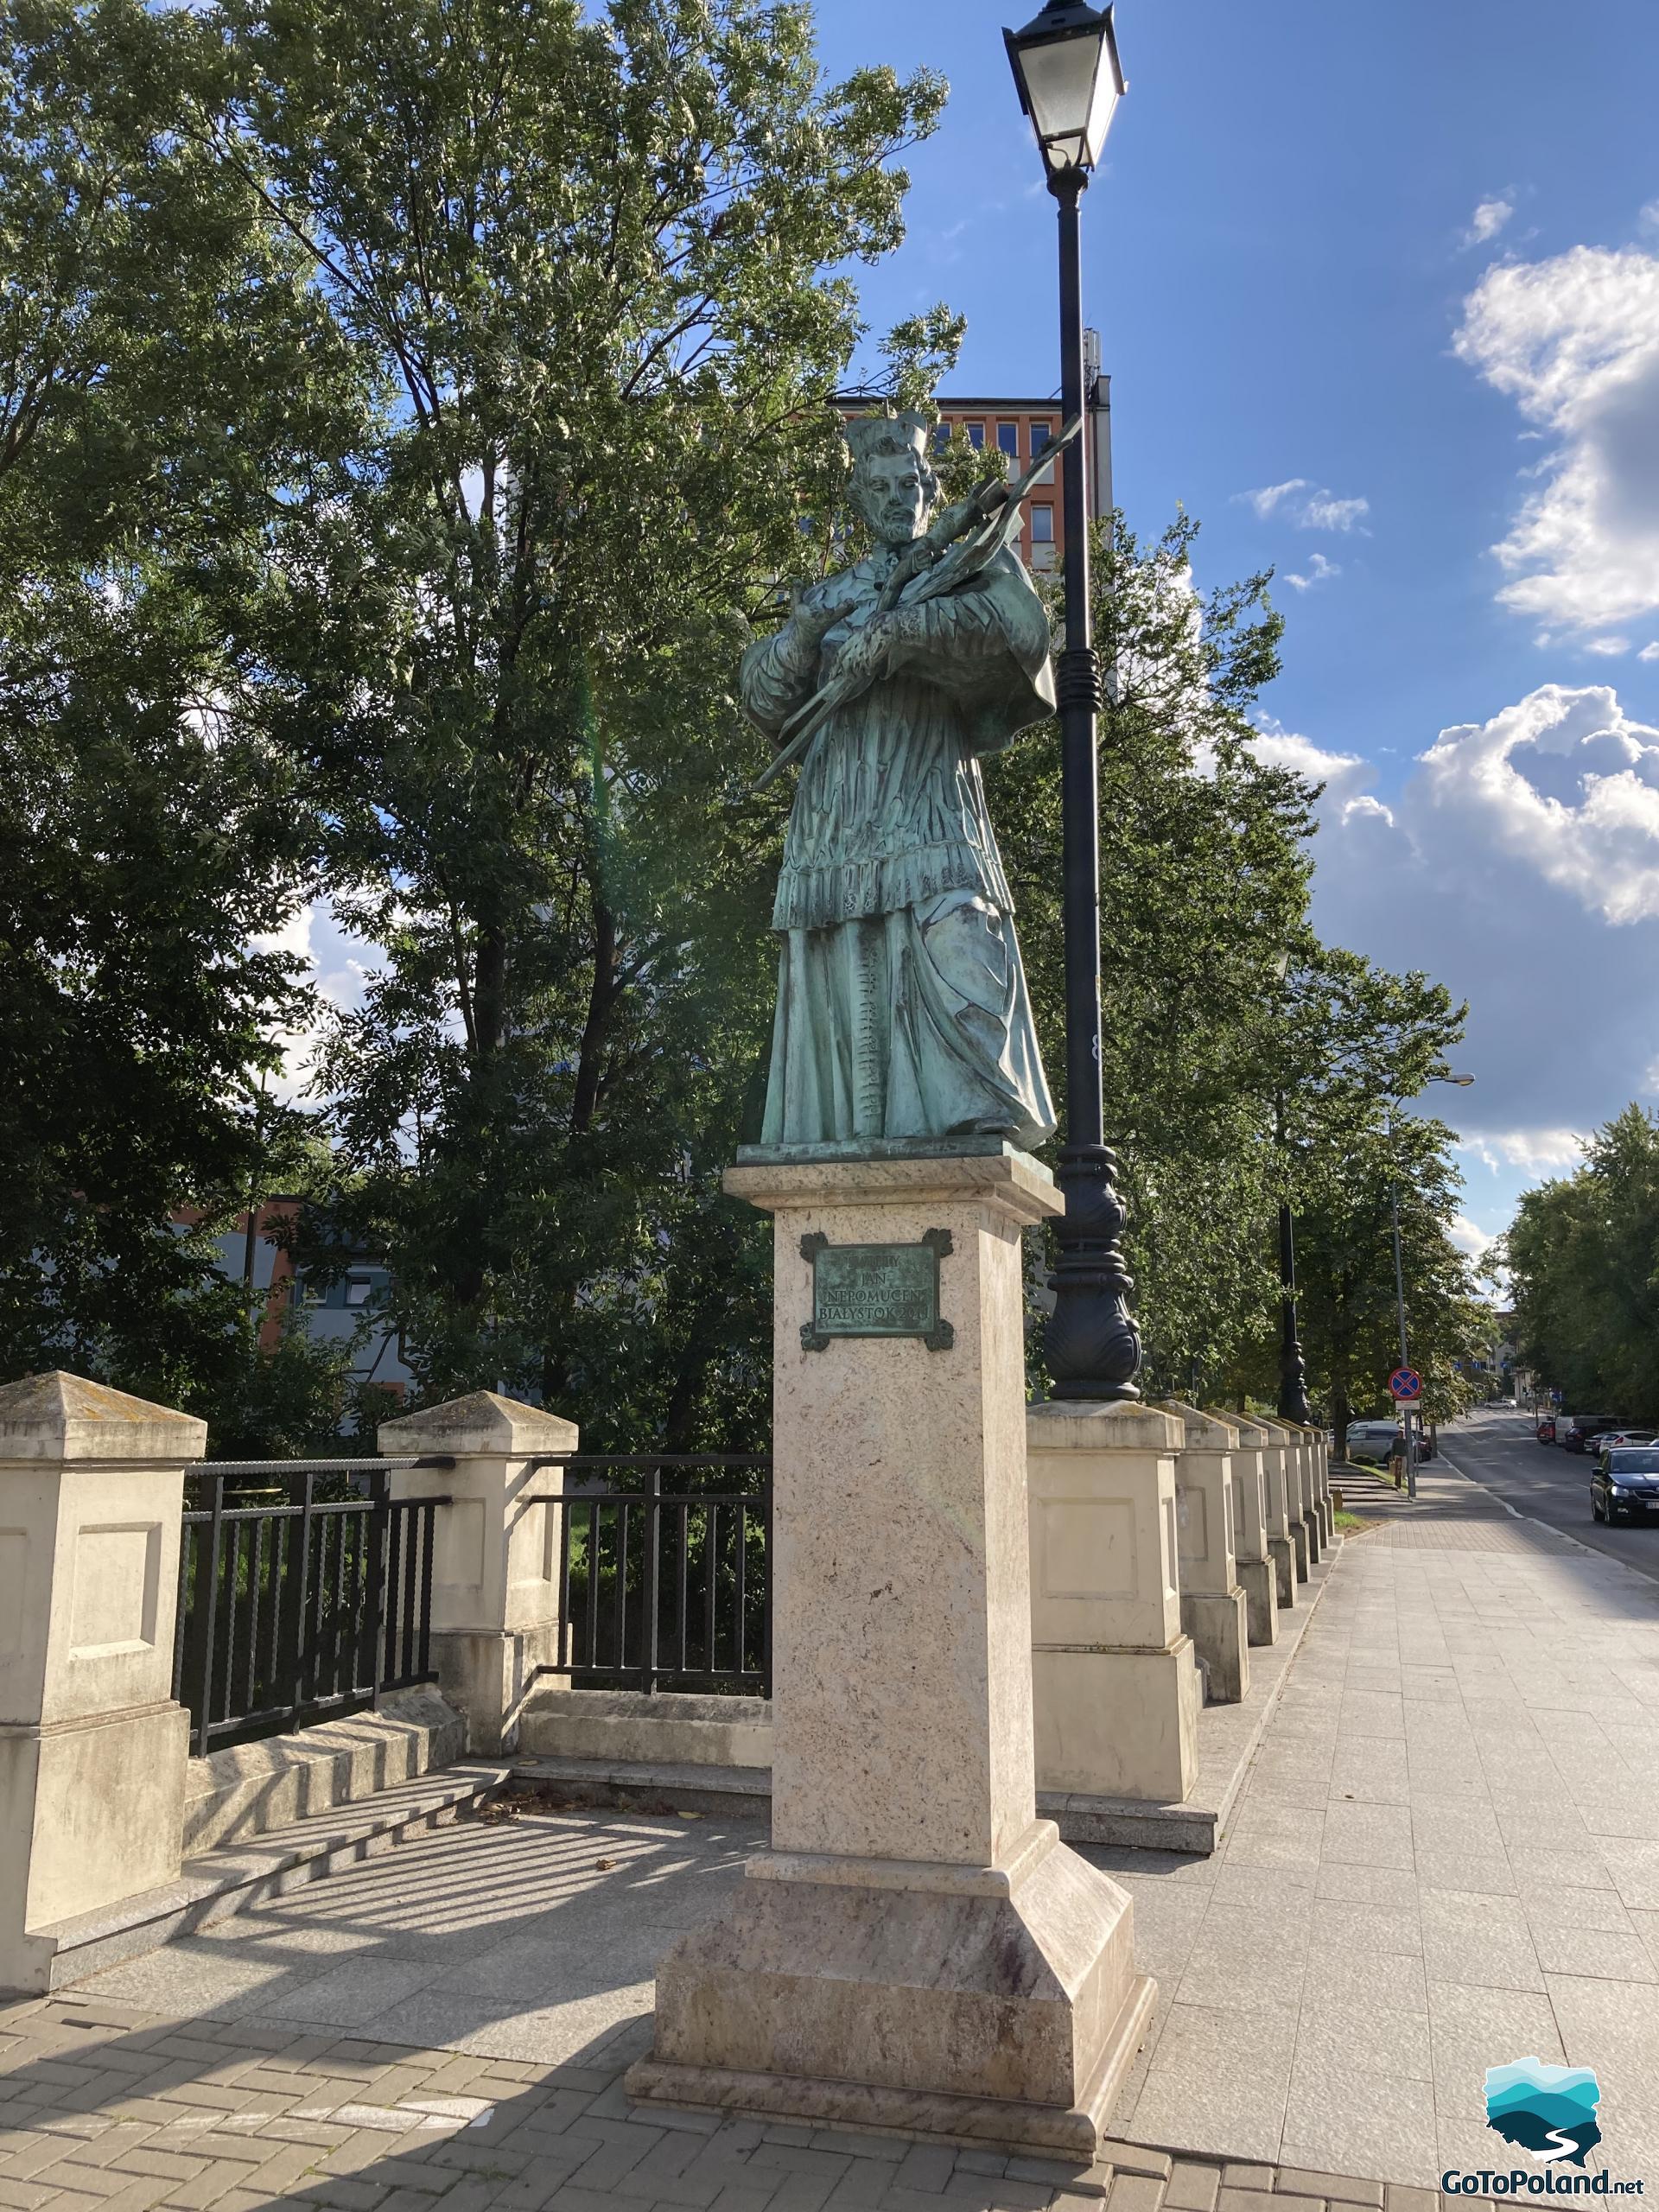 a statue of John of Nepomuk on a pedestal stands on the street